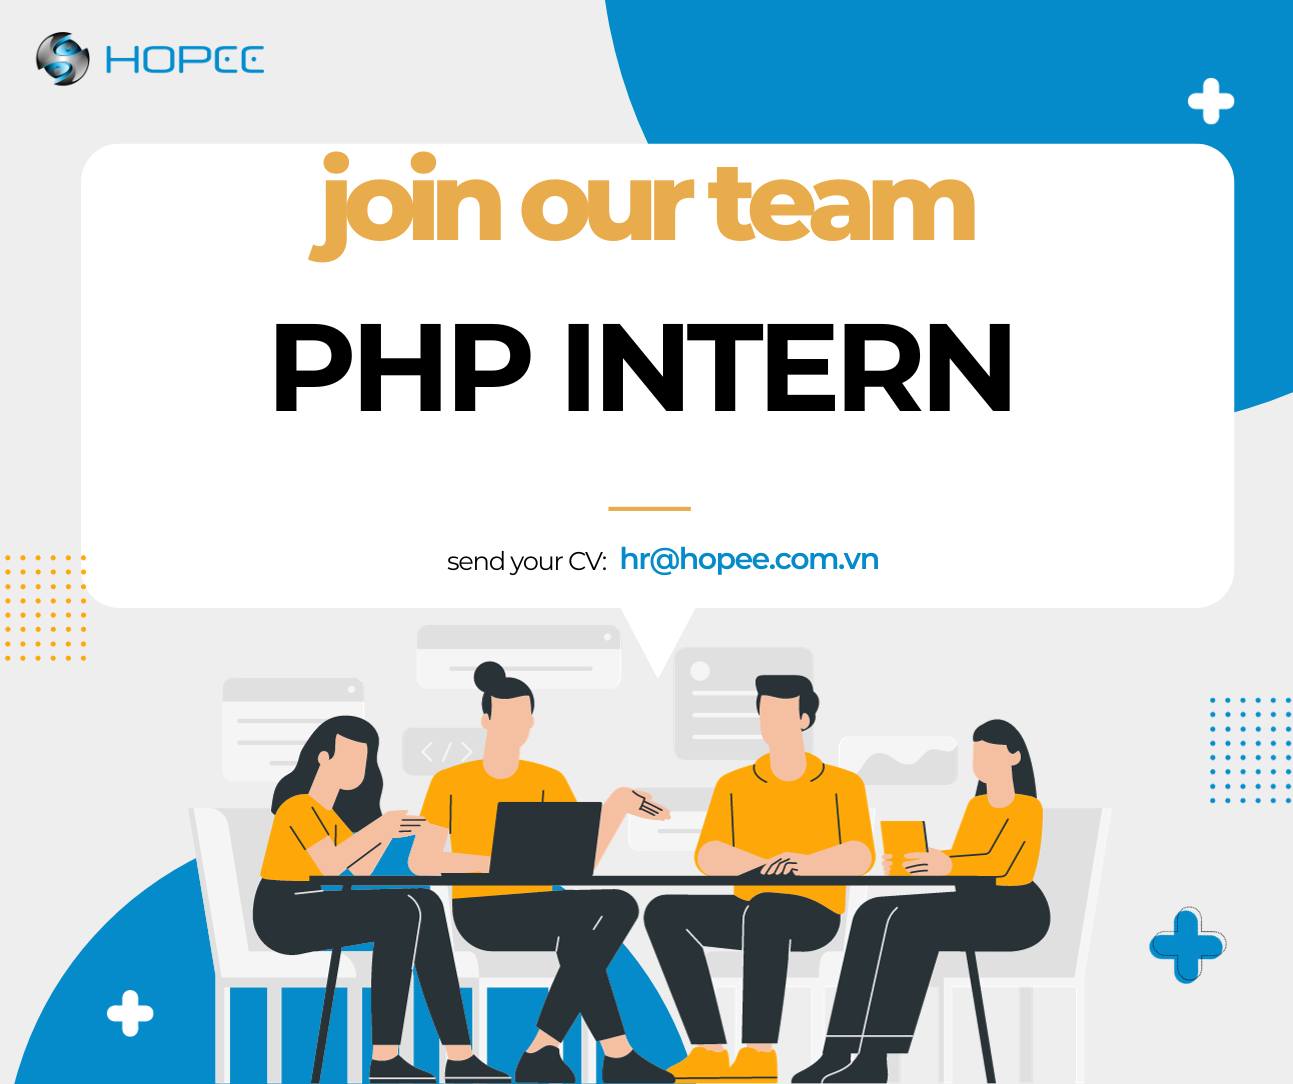 Hopee is looking for PHP Intern